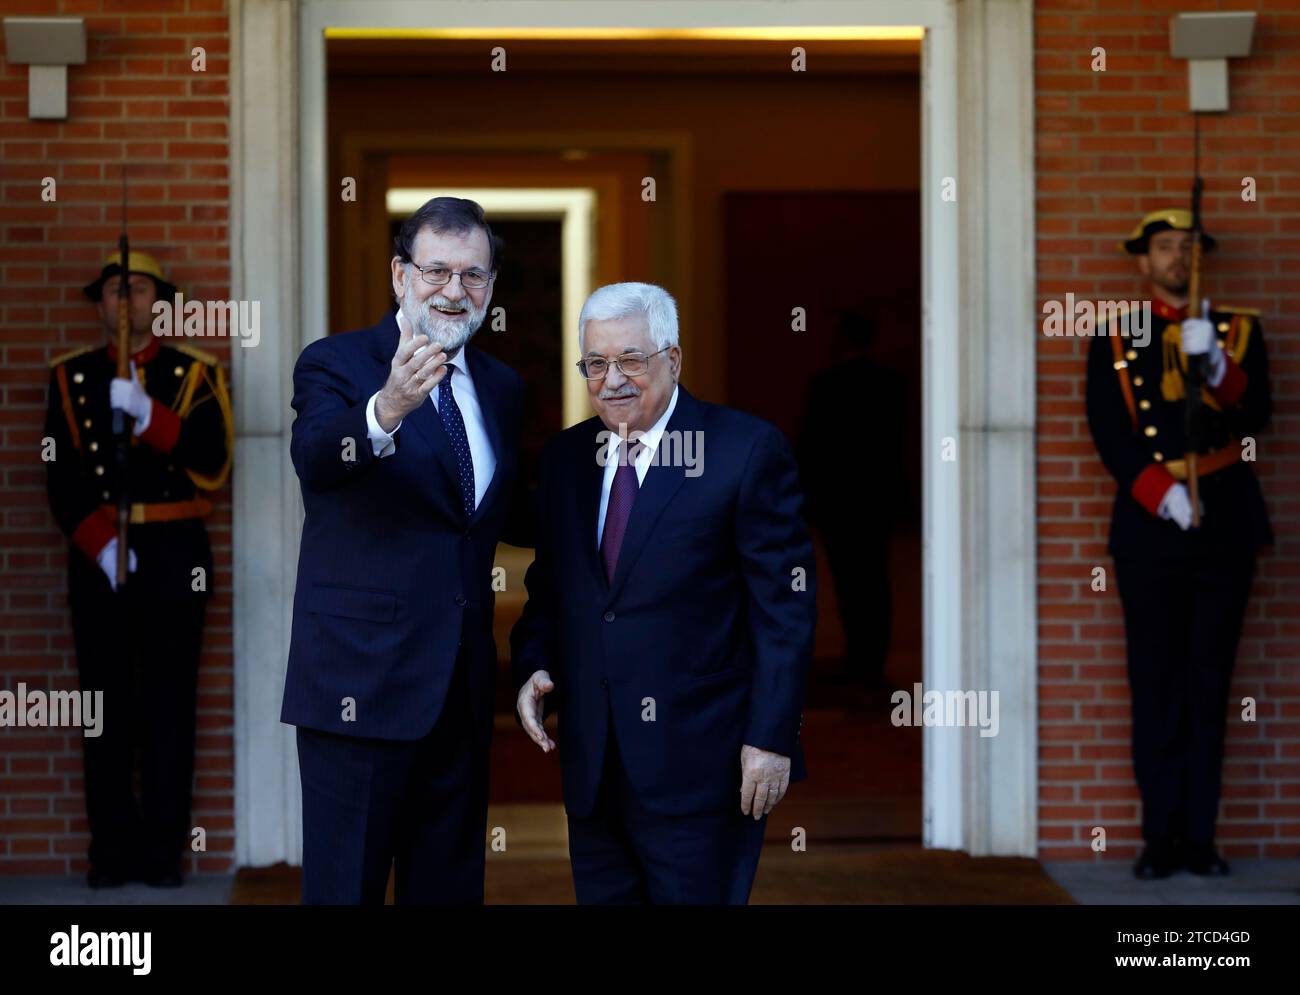 Madrid, 11/20/2017. The President of the Government Mariano Rajoy receives the President of the Palestinian National Authority Mahmoud Abbas at La Moncloa. Photo: Oscar del Pozo ARCHDC. Credit: Album / Archivo ABC / Oscar del Pozo Stock Photo